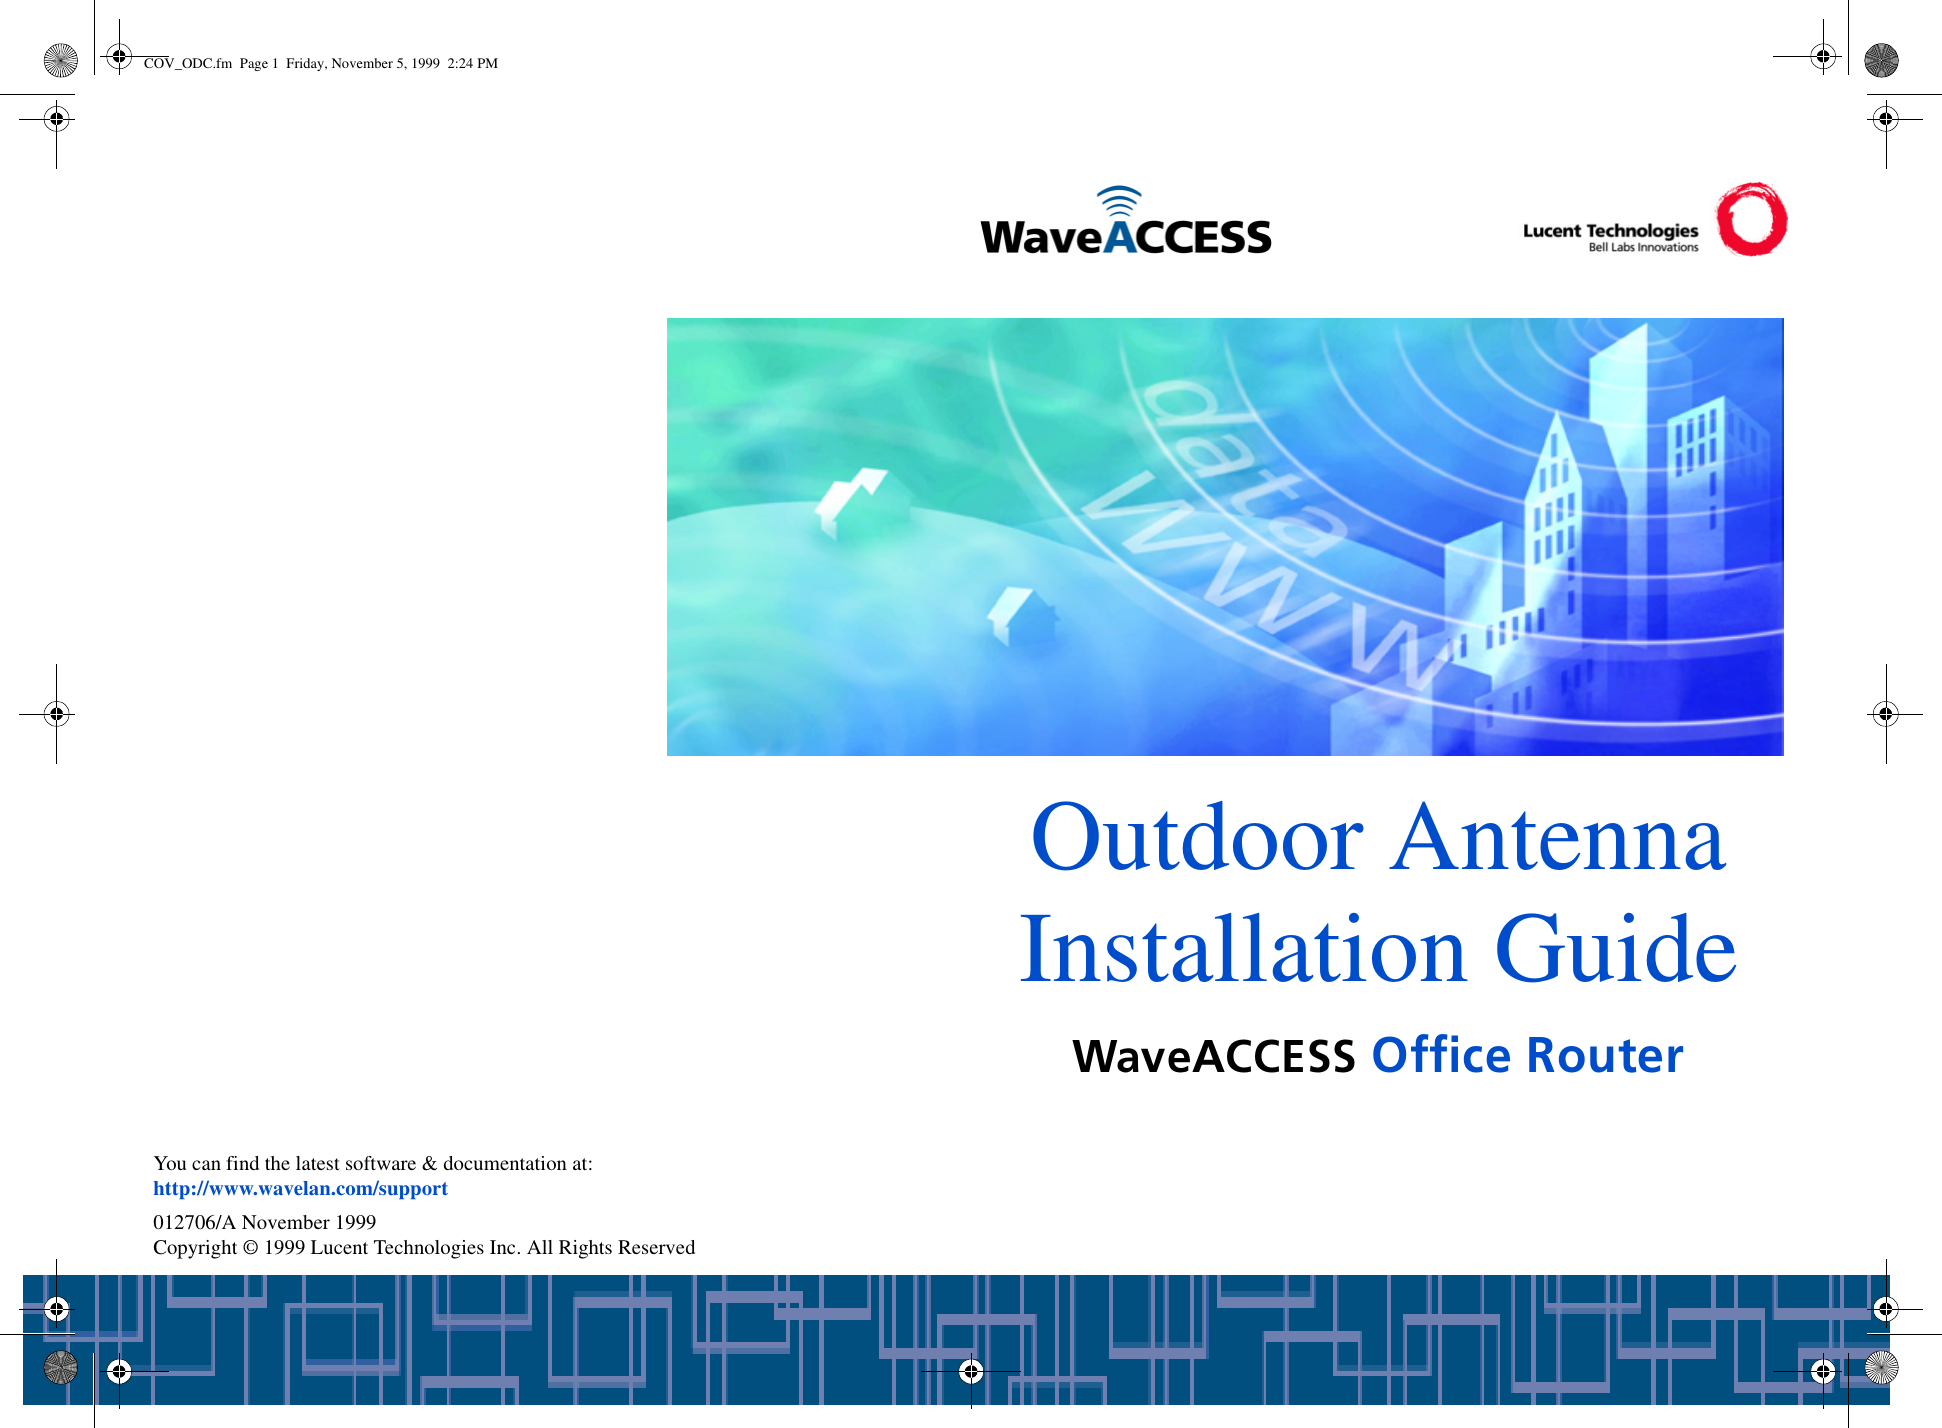 Outdoor Antenna Installation Guide;EZI%&apos;&apos;)773JJMGI6SYXIV012706/A November 1999Copyright © 1999 Lucent Technologies Inc. All Rights ReservedYou can find the latest software &amp; documentation at:http://www.wavelan.com/supportCOV_ODC.fm  Page 1  Friday, November 5, 1999  2:24 PM